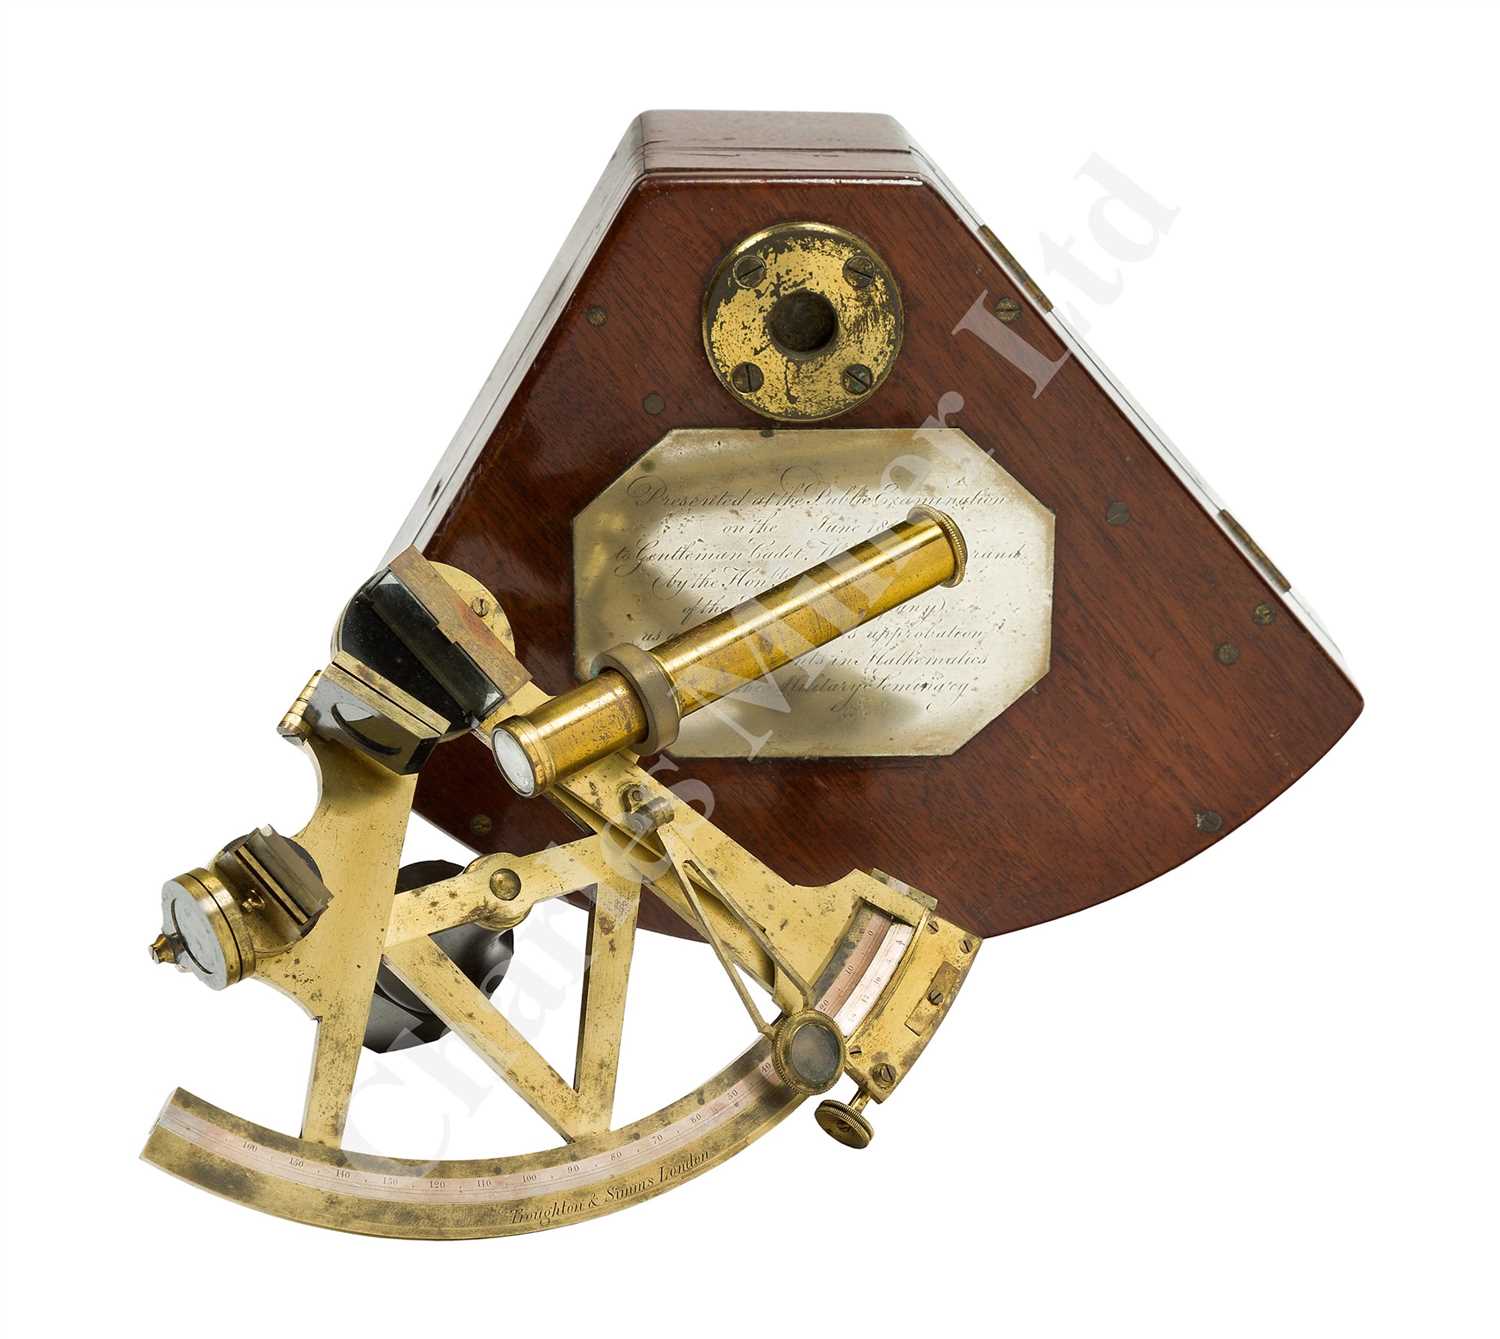 Lot 197 - A FINE 4IN. RADIUS SURVEYING SEXTANT BY TROUGHTON & SIMMS, PRESENTED TO GENTLEMAN CADET WILLIAM E. WARRAND BY THE EAST INDIA COMPANY, JUNE 1849